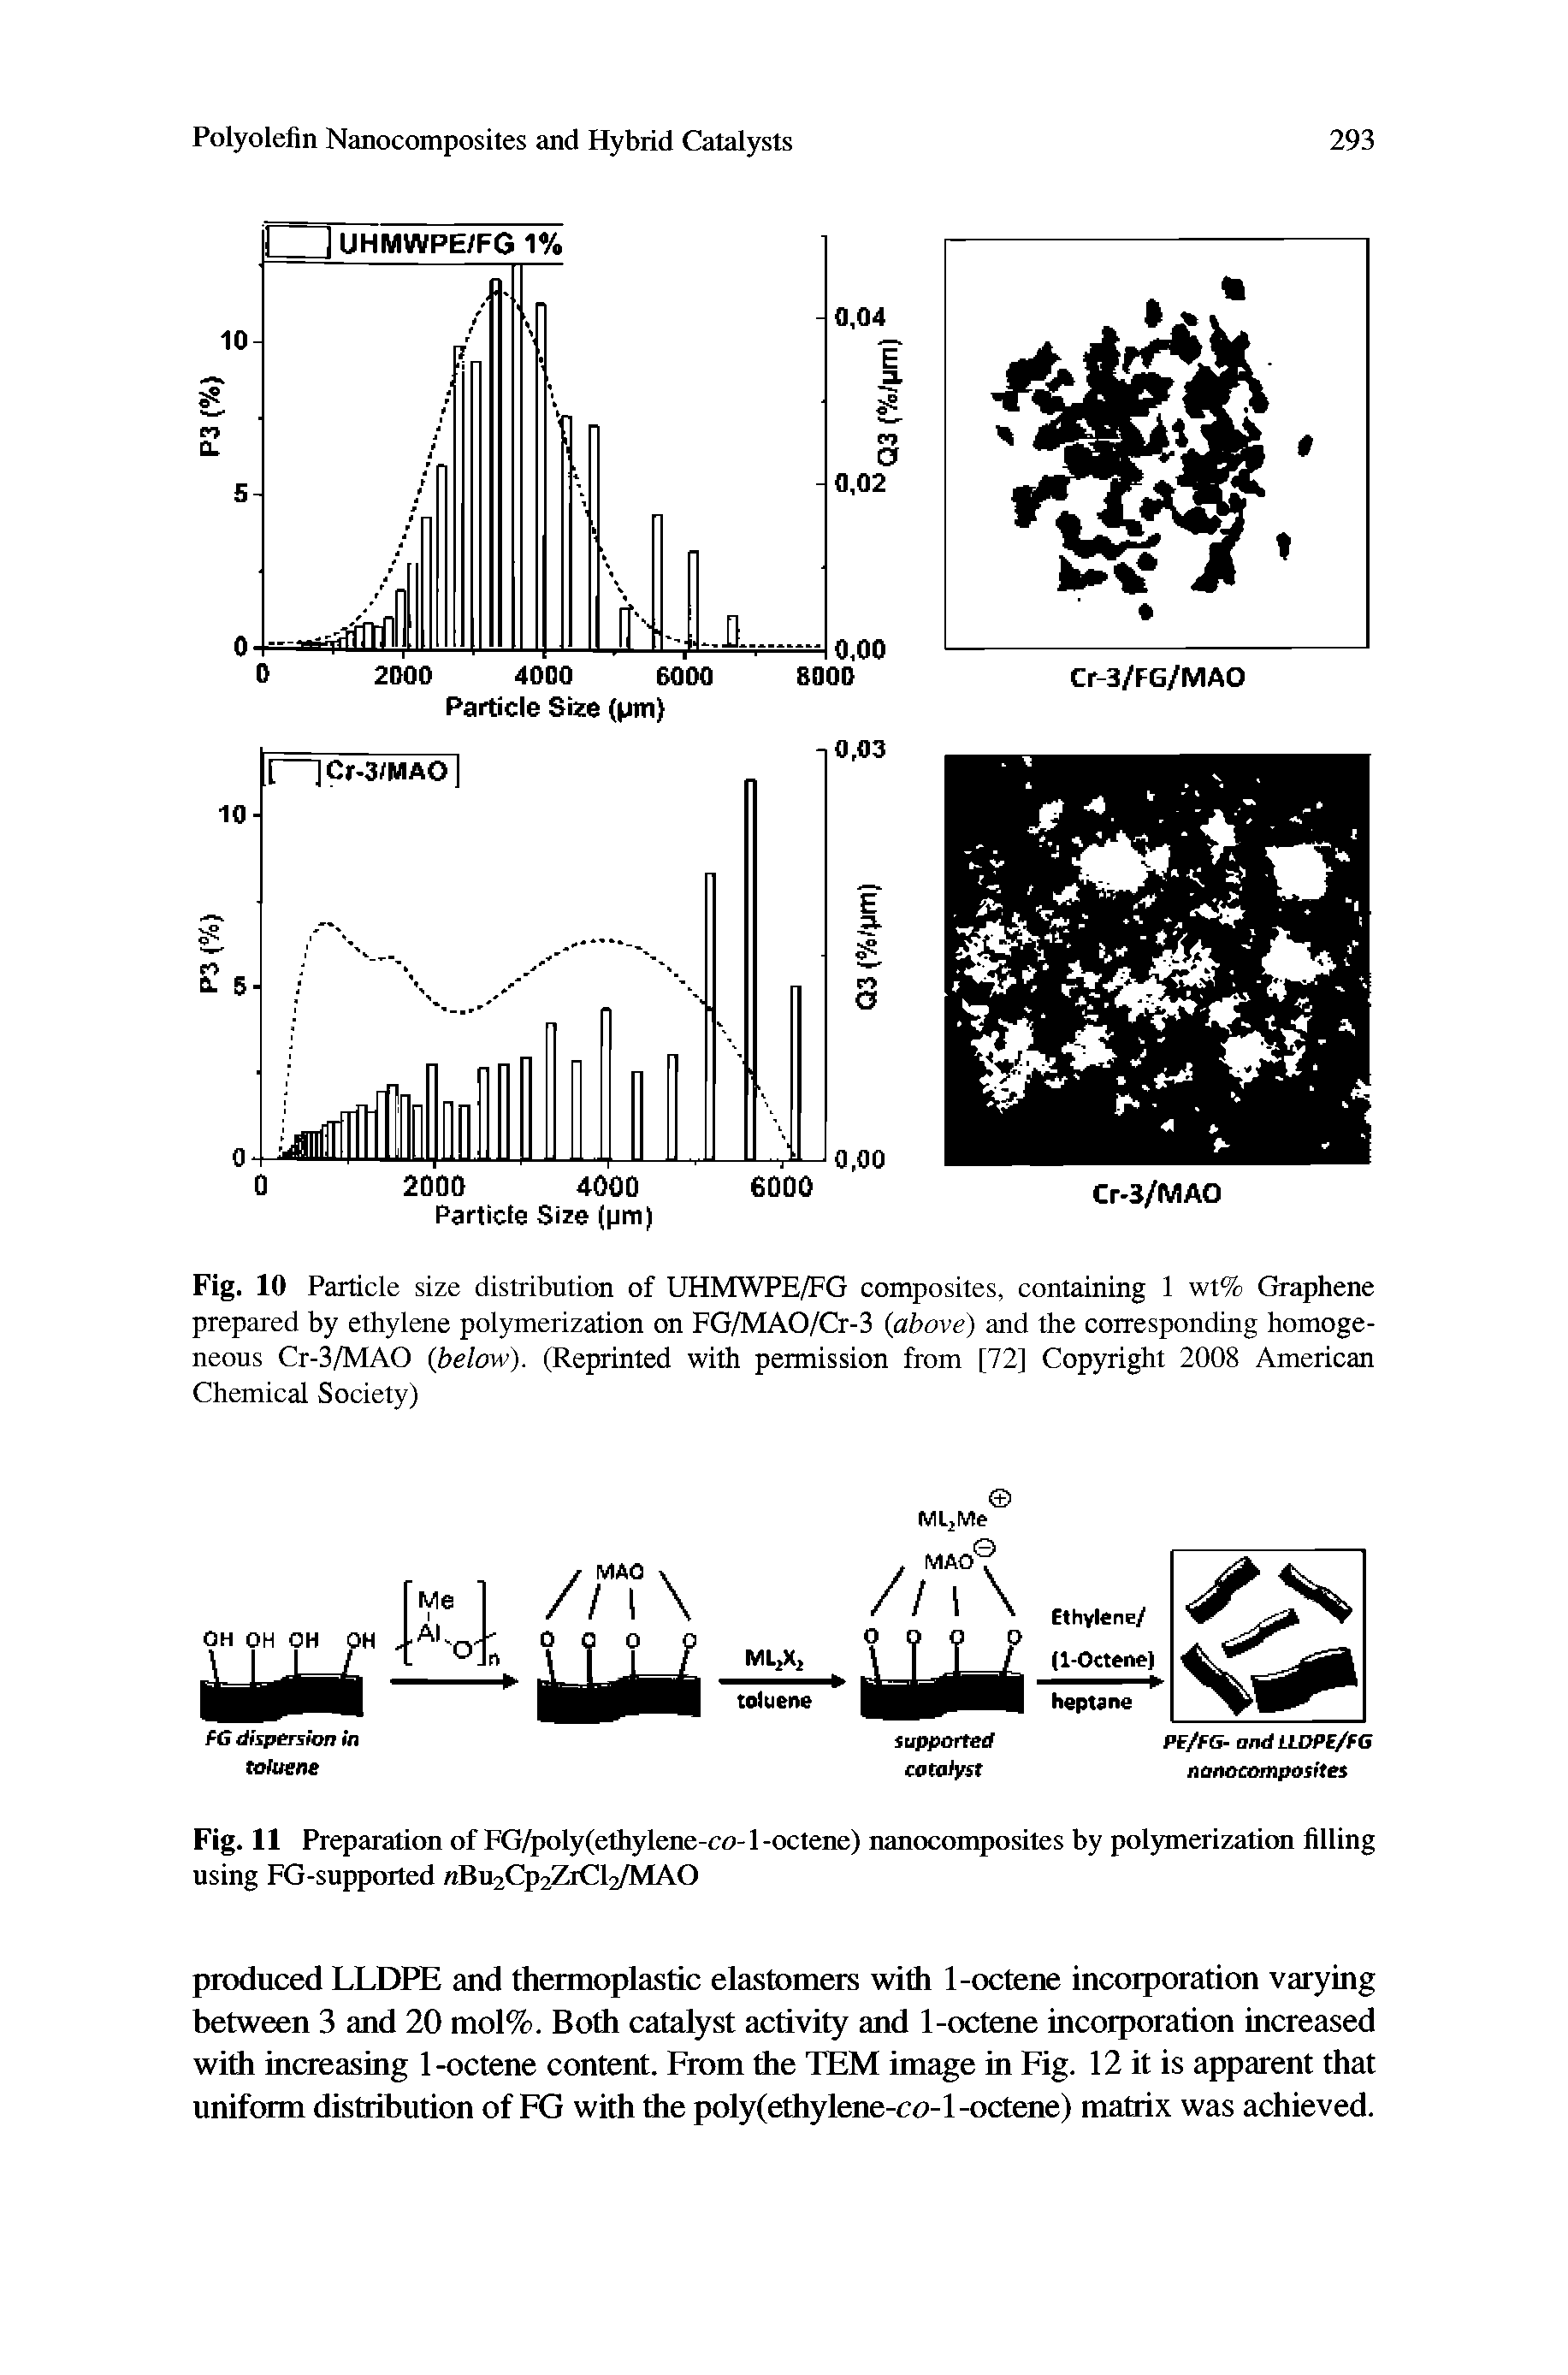 Fig. 10 Particle size distribution of UHMWPE/FG composites, containing 1 wt% Graphene prepared by ethylene polymerization on FG/MAO/Cr-3 above) and the corresponding homogeneous Cr-3/MAO (below). (Reprinted with permission from [72] Copyright 2008 American Chemical Society)...